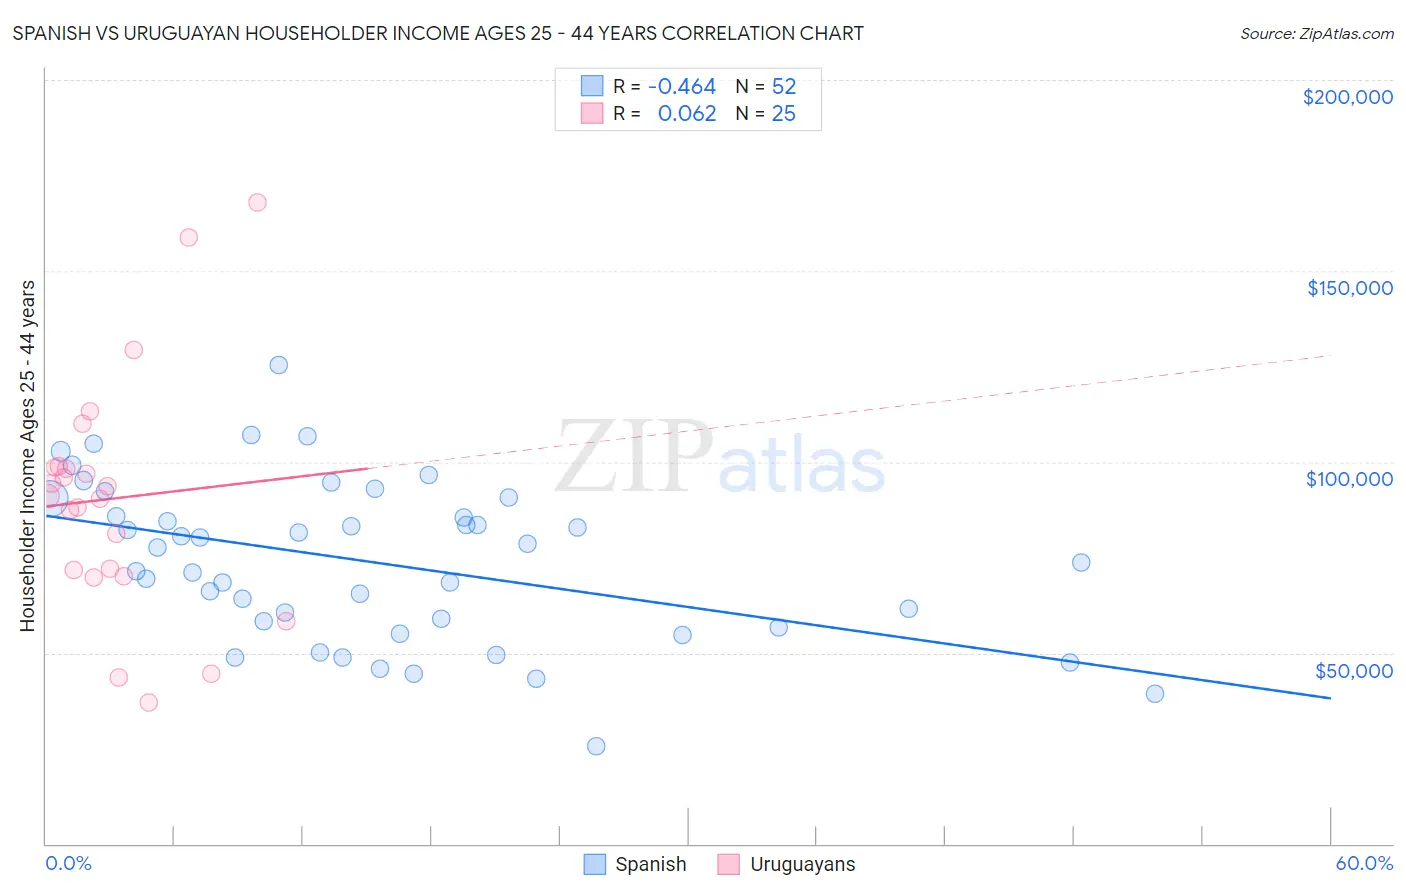 Spanish vs Uruguayan Householder Income Ages 25 - 44 years